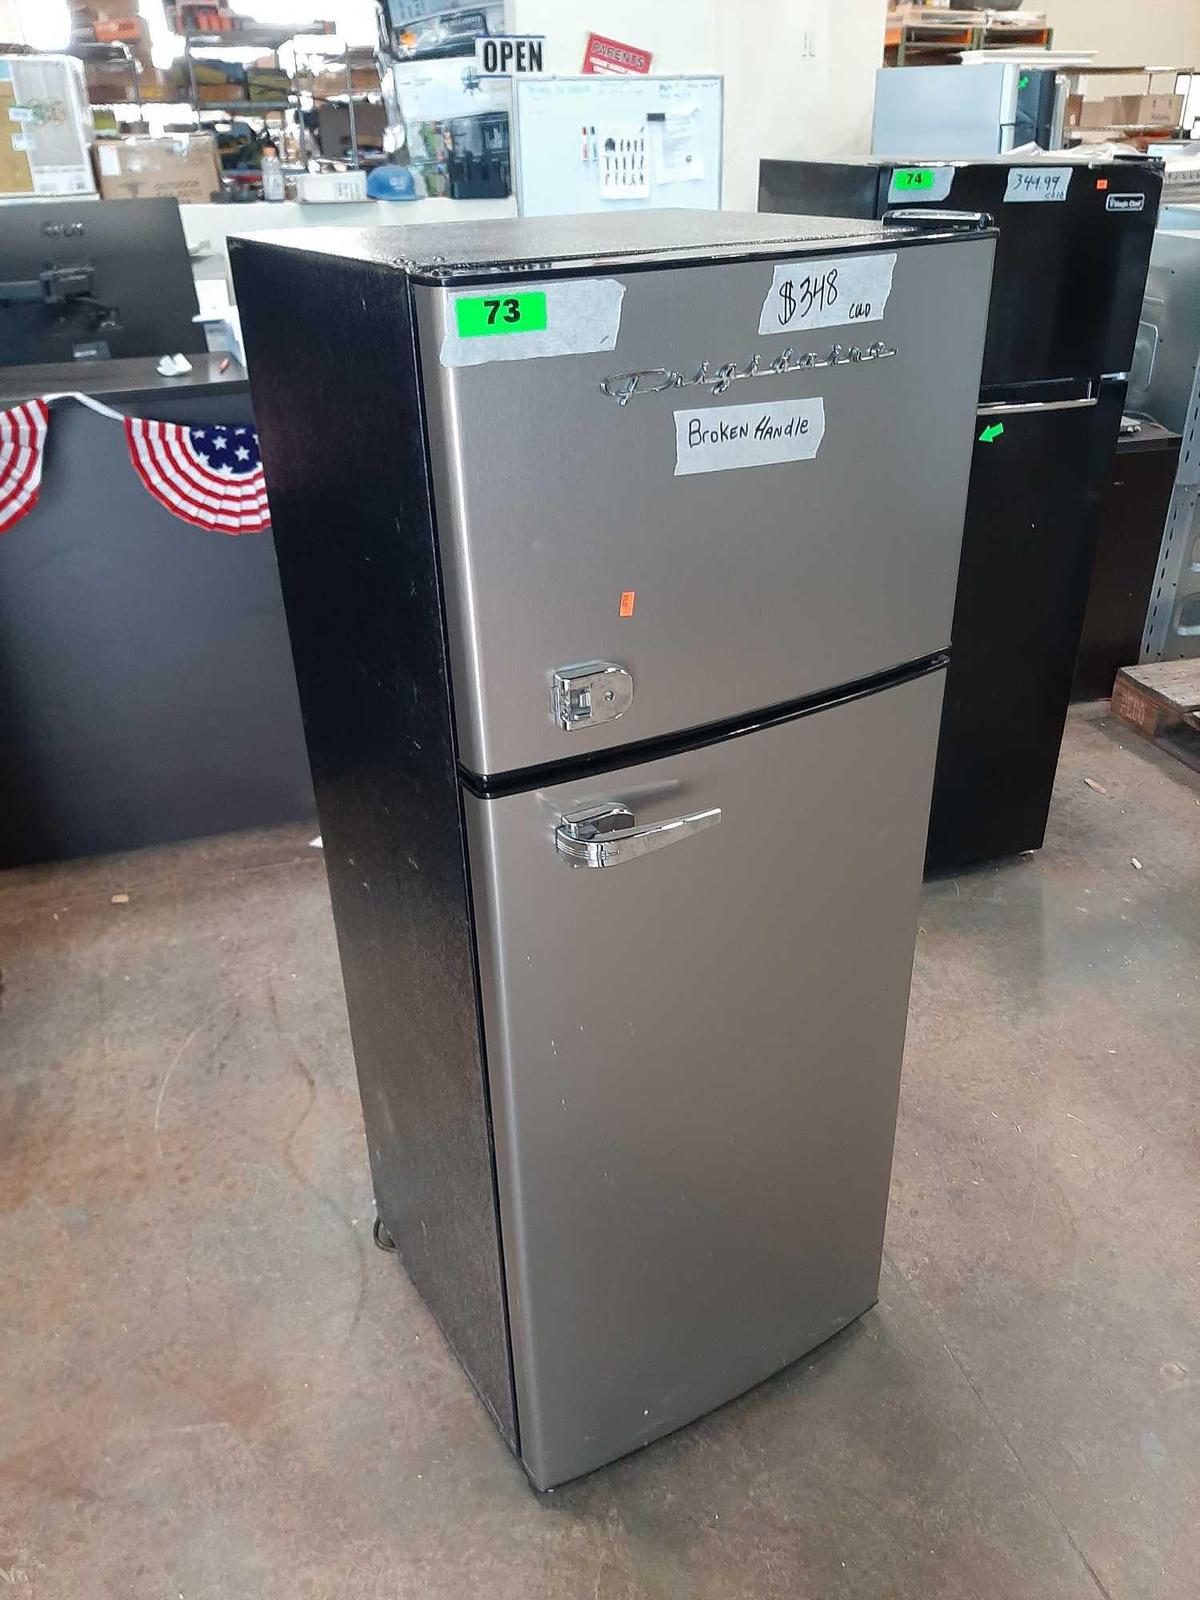 Frigidaire 7.5 cu. ft. Mini Refrigerator with Top Freezer*COLD*PREVIOUSLY INSTALLED*BROKEN HANDLE*